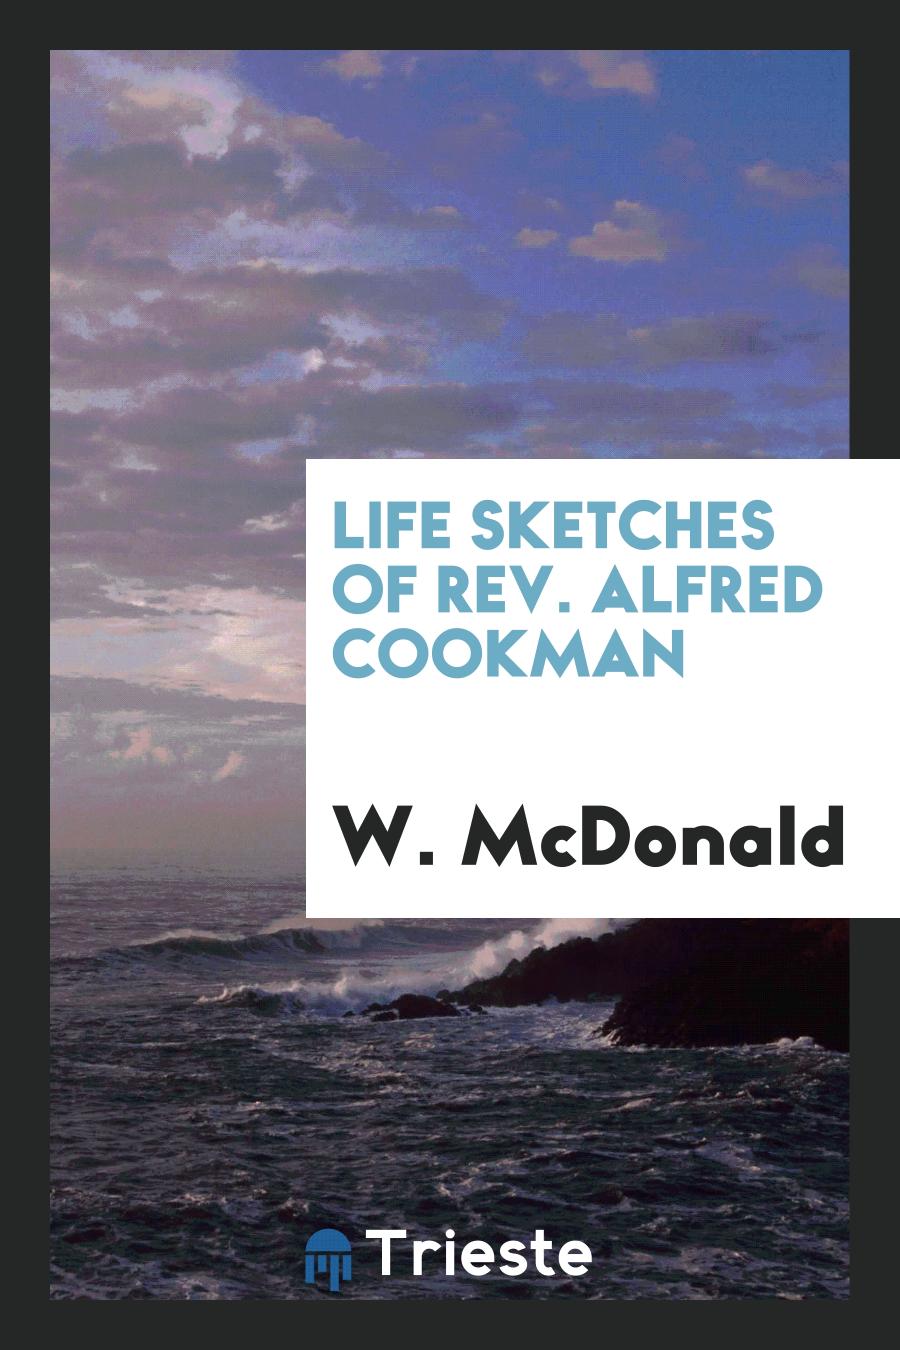 Life sketches of Rev. Alfred Cookman